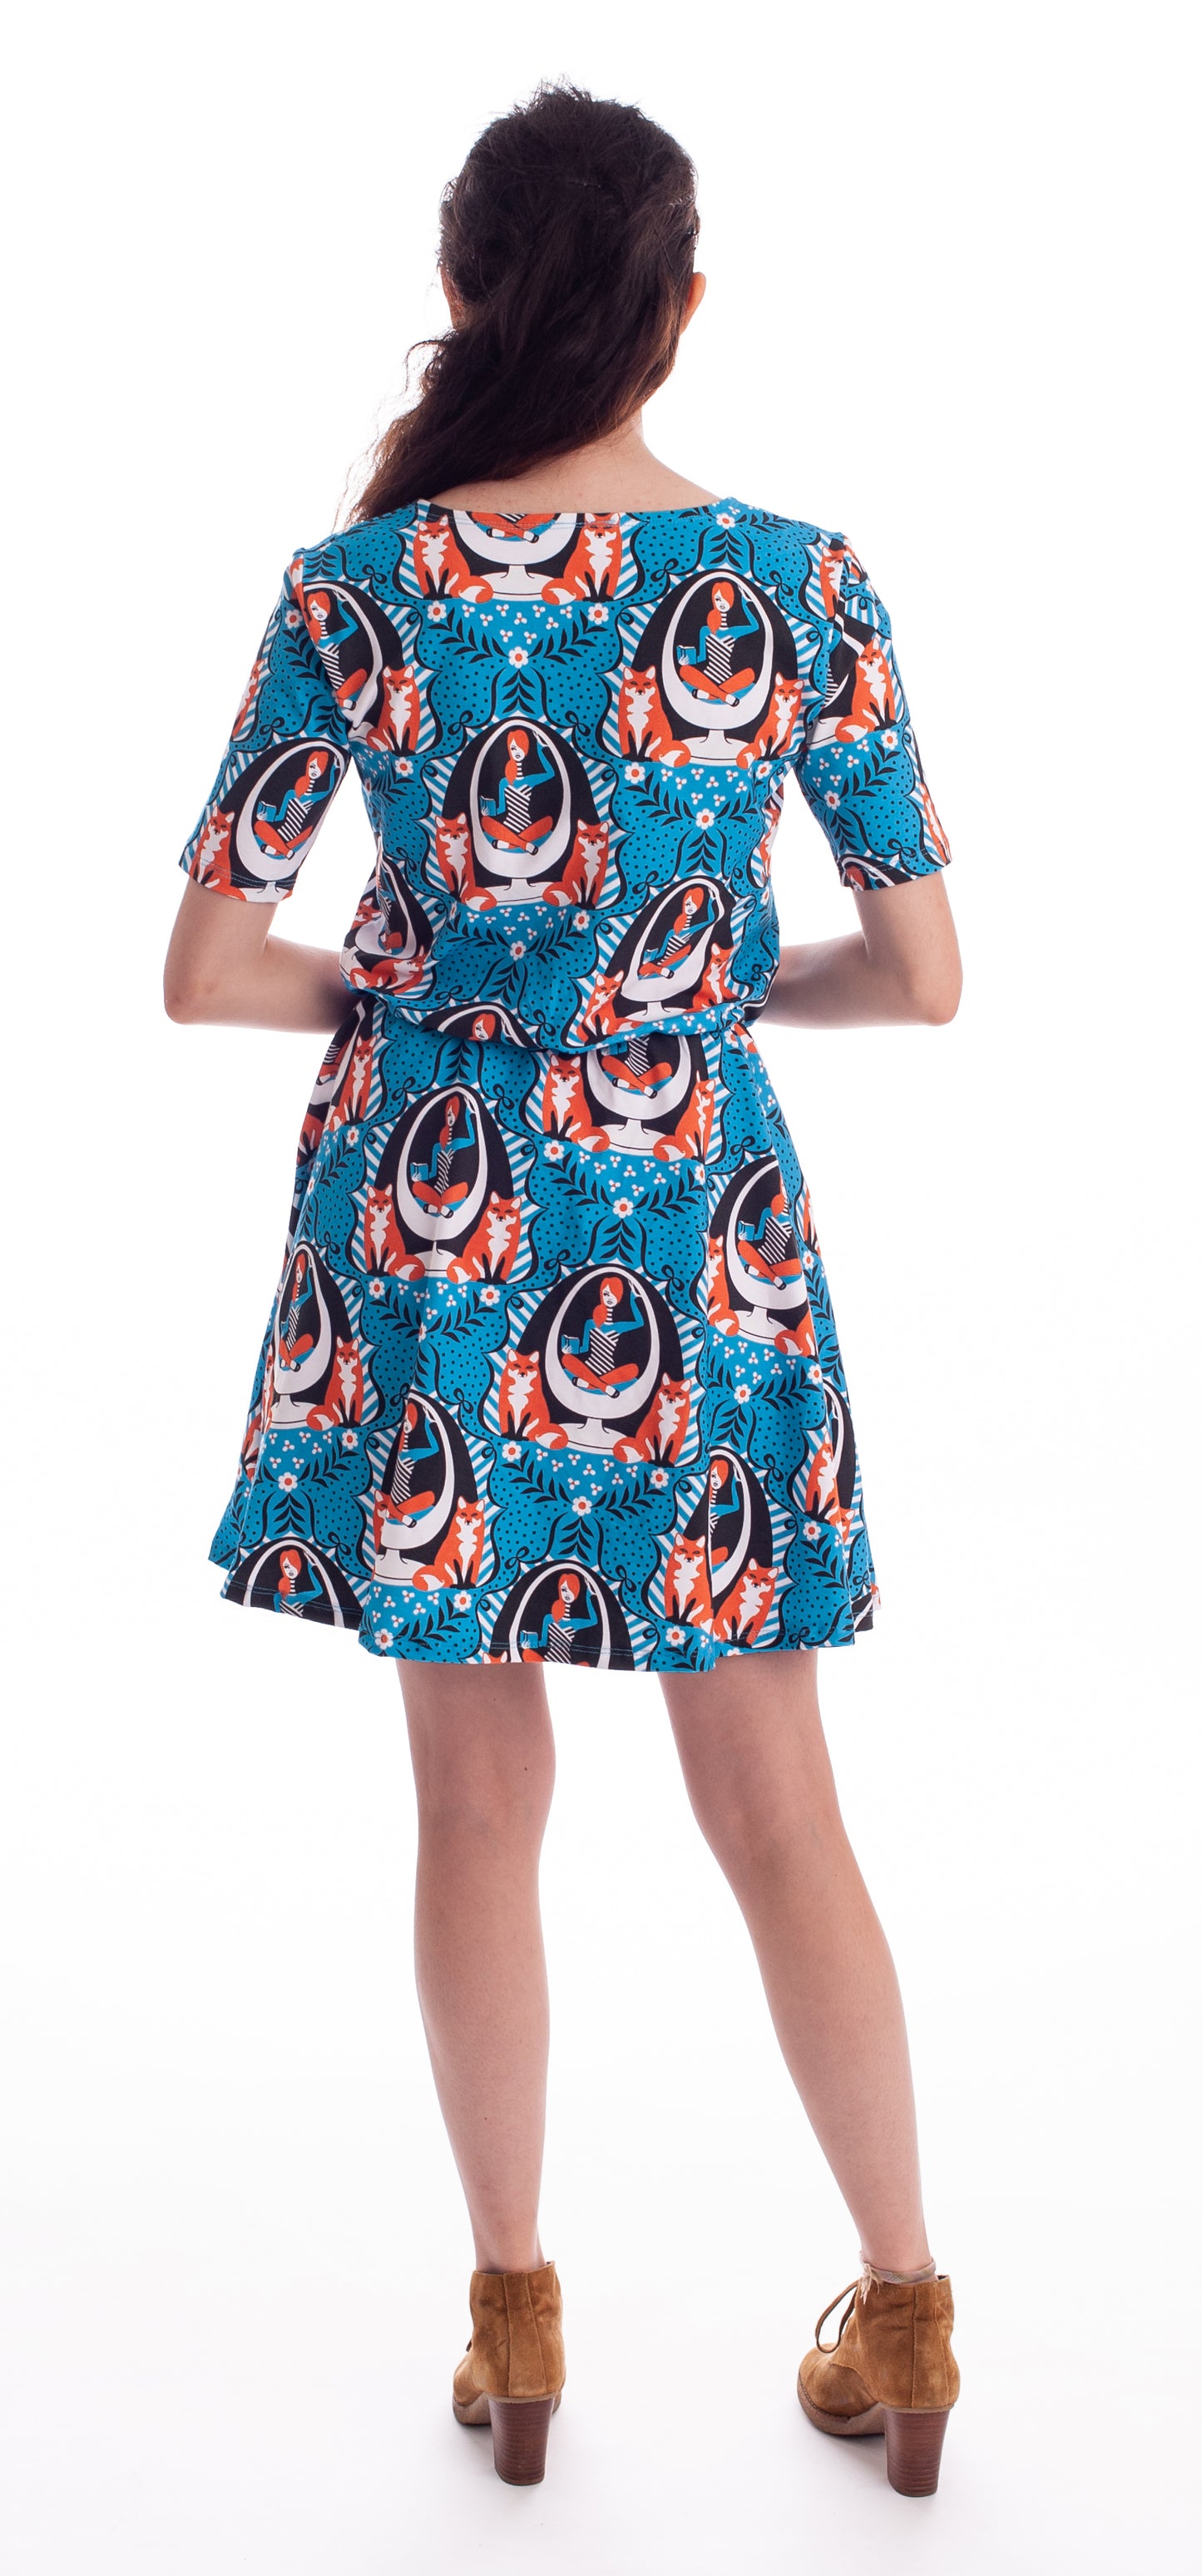 Dark haired model wearing bright blue dres with graphic of redhead girl sitting in egg chair flanked by two foxes